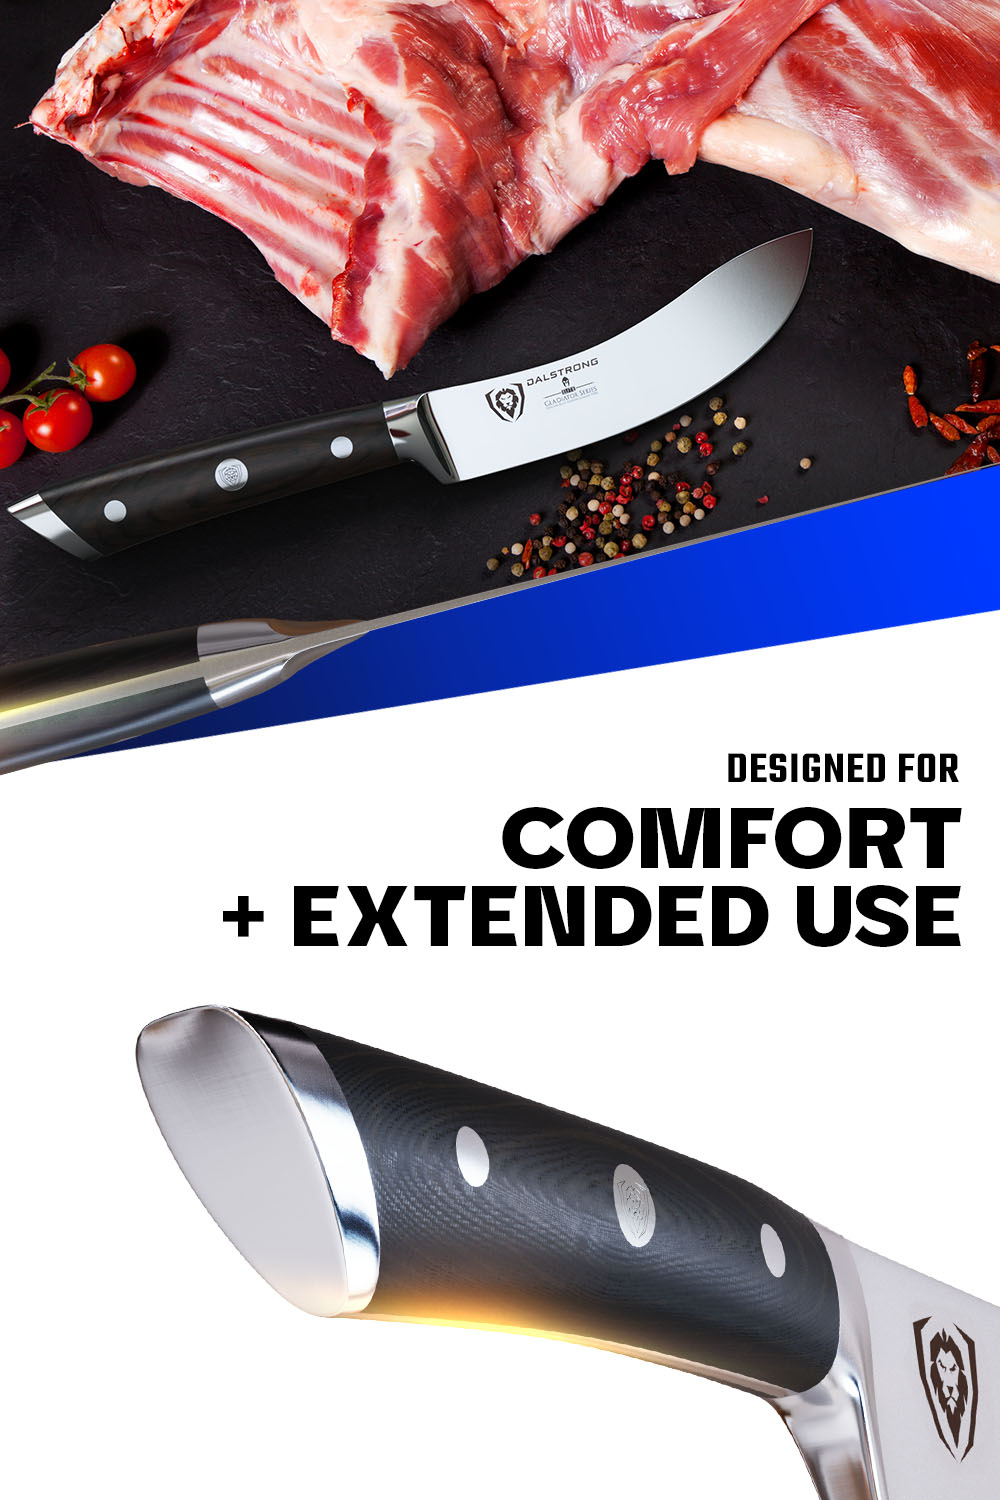 What is the difference between a boning knife and fillet knife? – Dalstrong